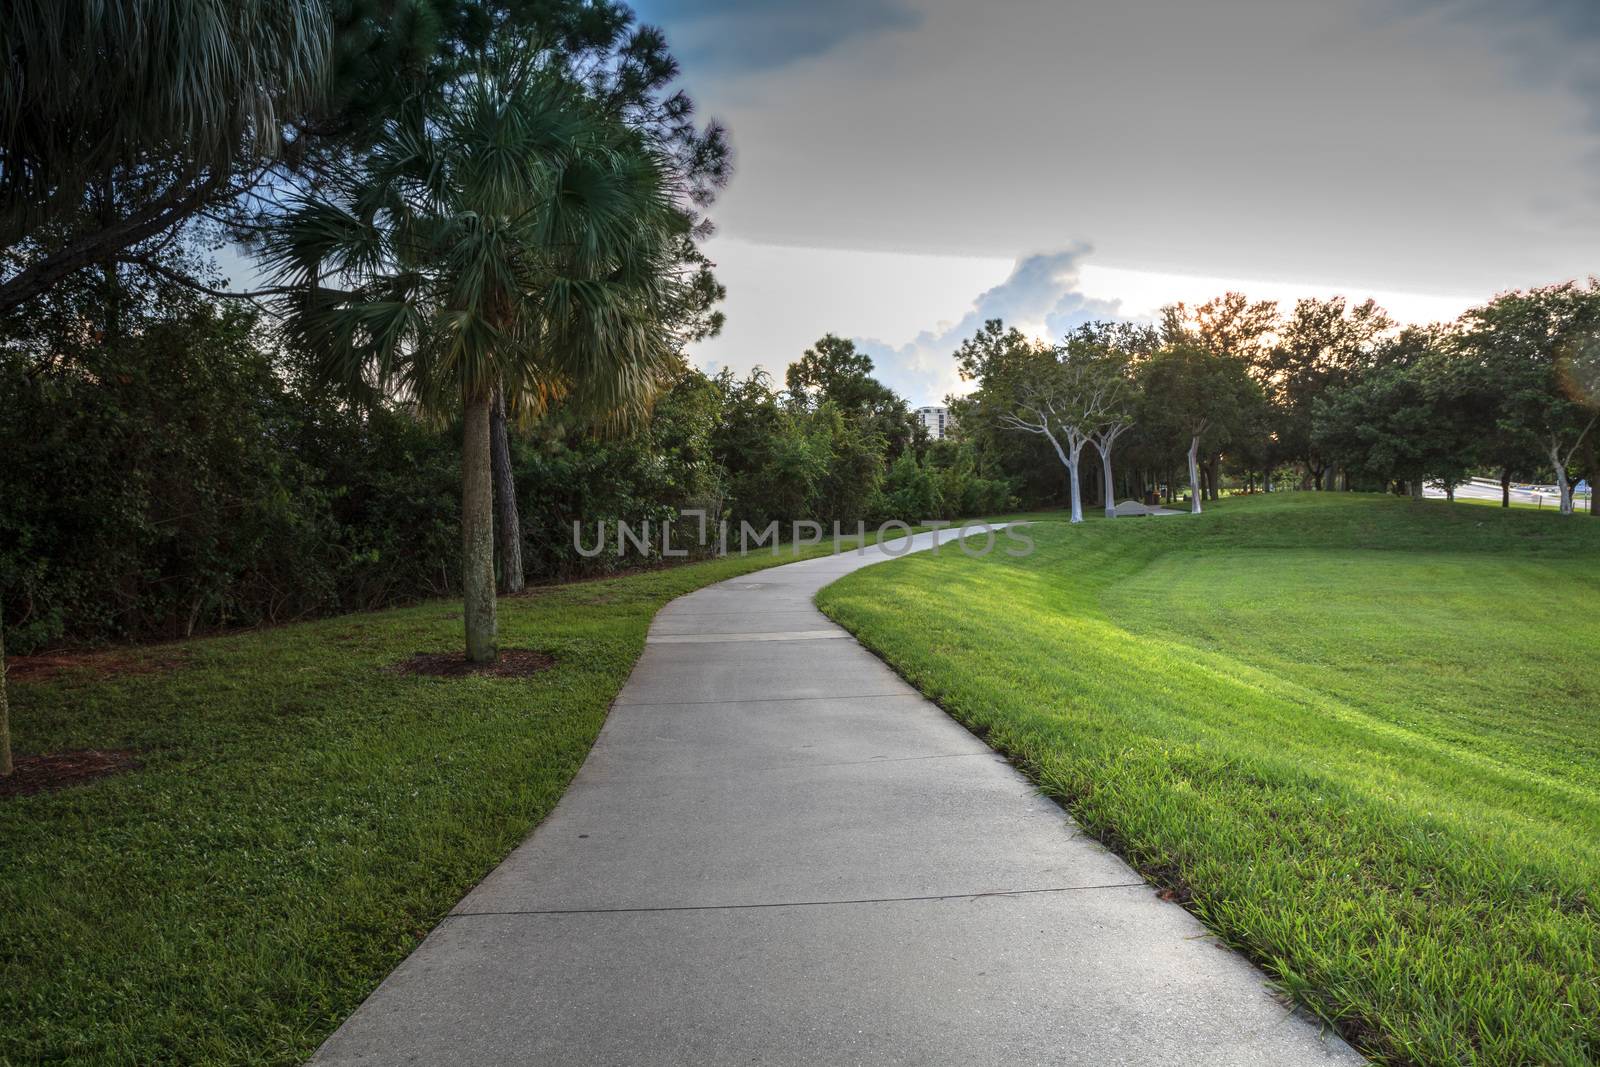 Conner Park path leads down to Delnor Wiggins Pass in Naples, Florida